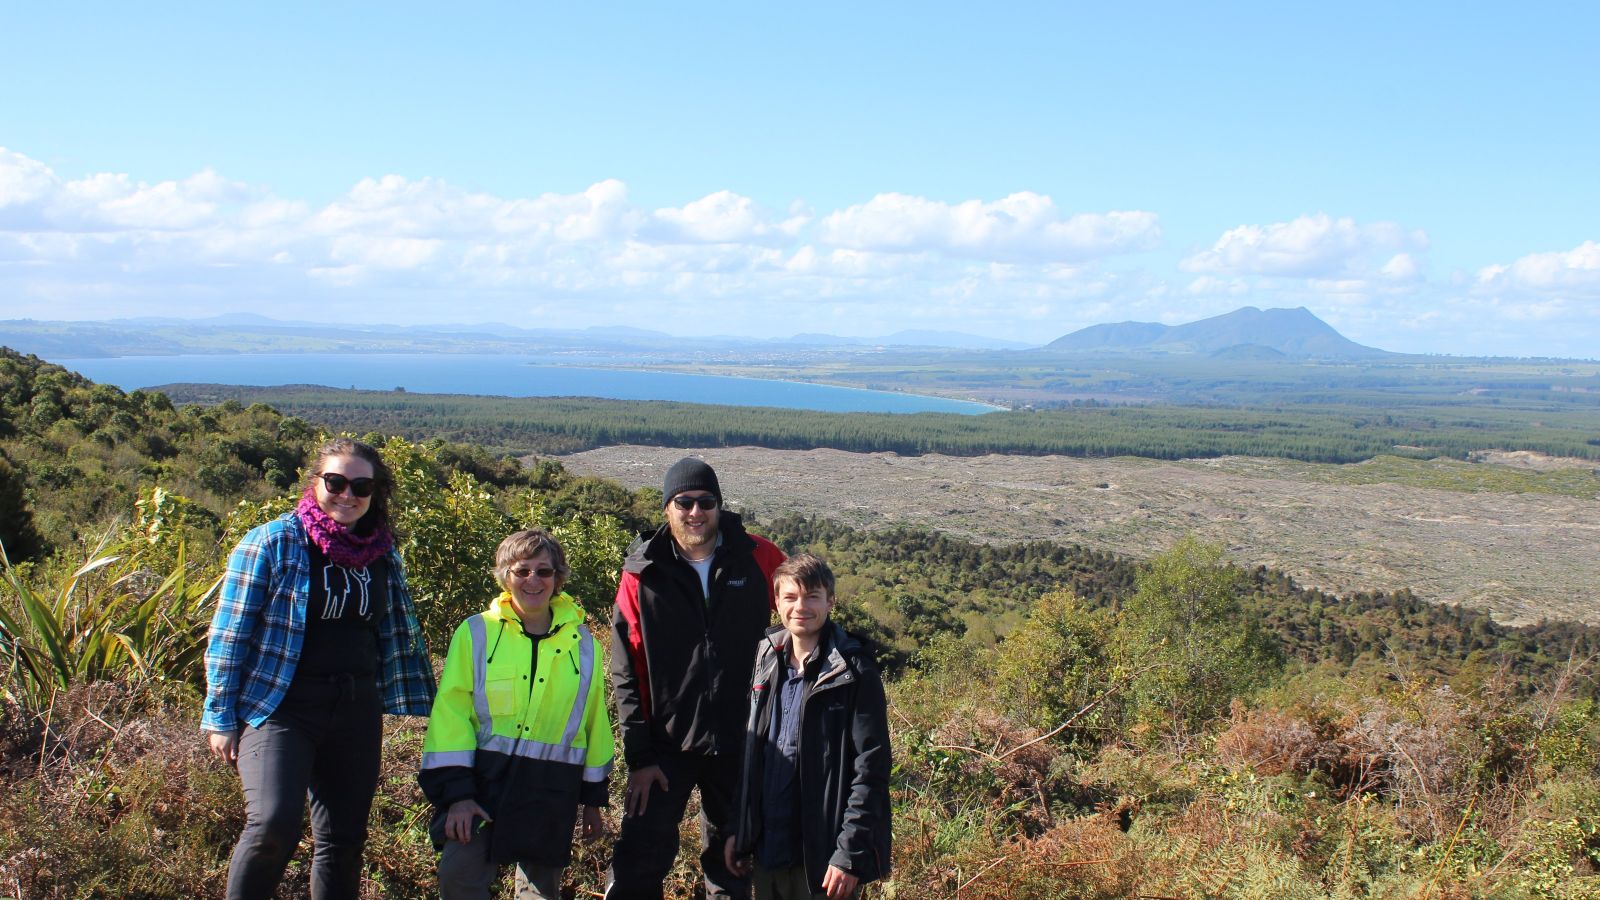 Ellie Mestel, Professor Martha Savage, Dr Simon Barker, and Dr Finn Illsley-Kemp with Tauhara volcano in the background.